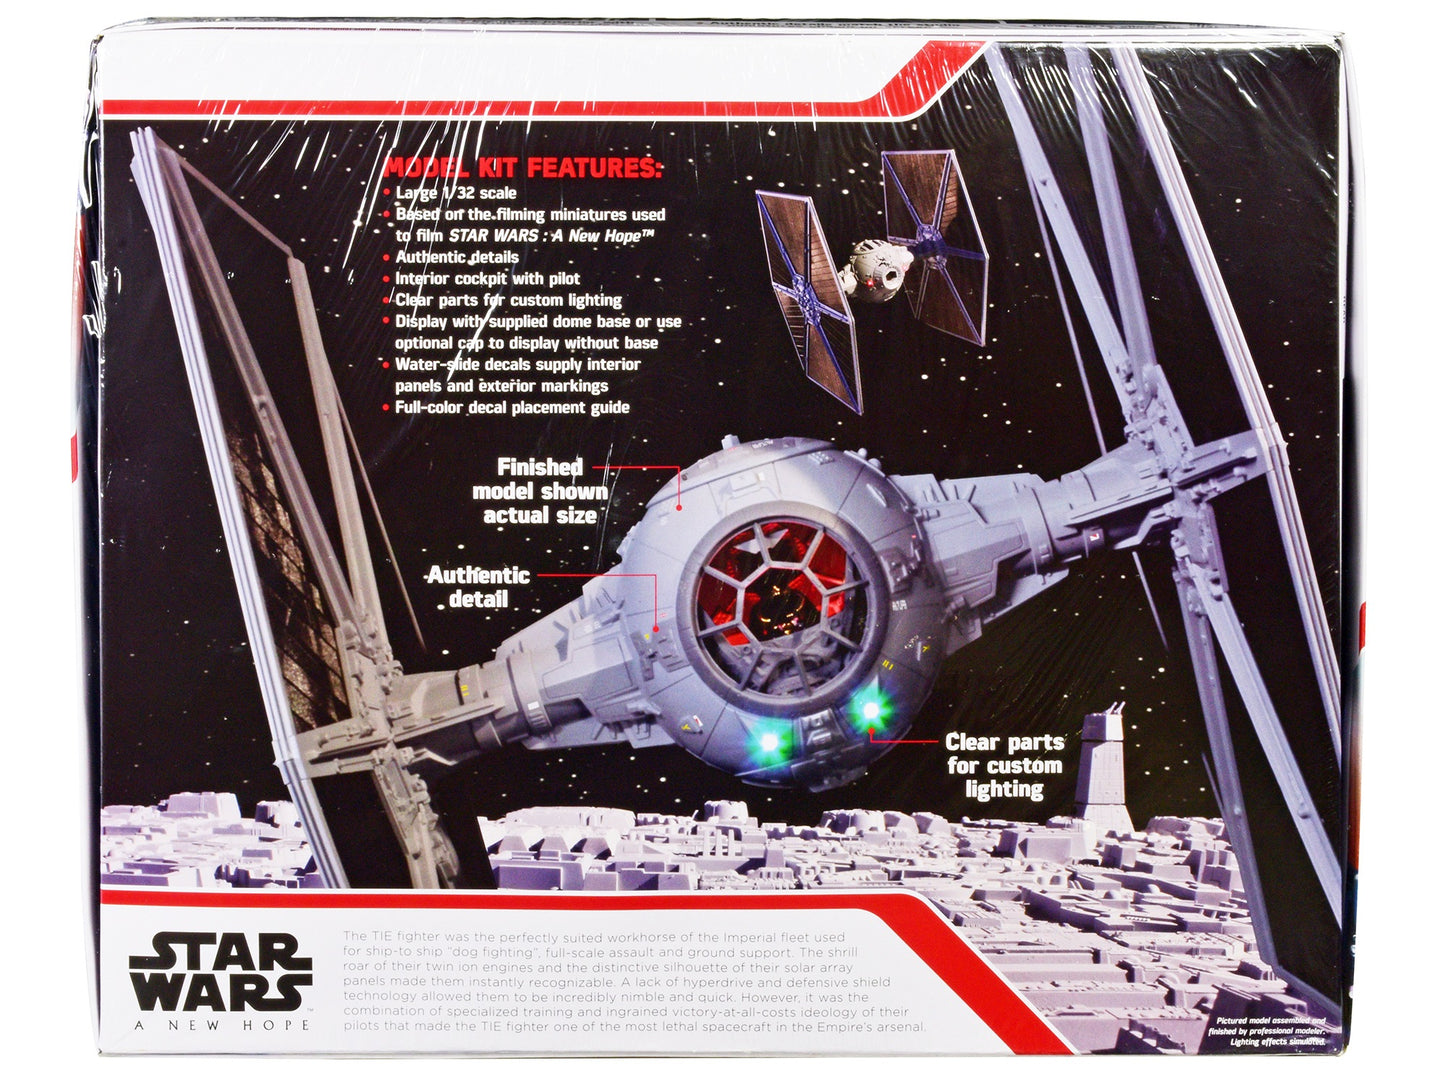 Skill 2 Model Kit Tie Fighter "Star Wars: Episode IV - A New Hope" (1977) Movie 1/32 Scale Model by AMT